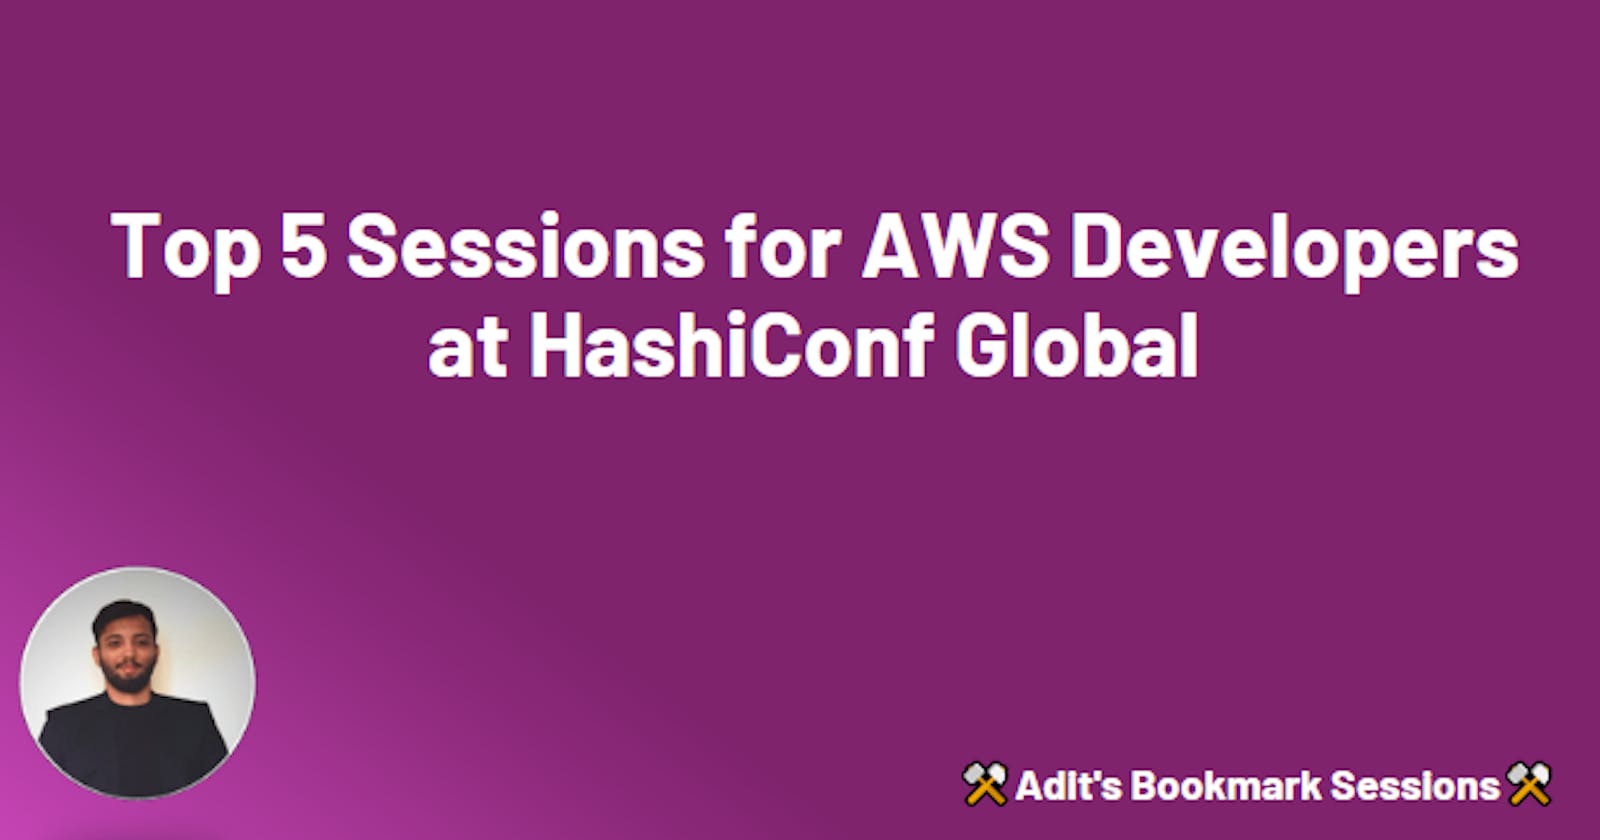 Top 5 Sessions for AWS Developers at HashiConf Global